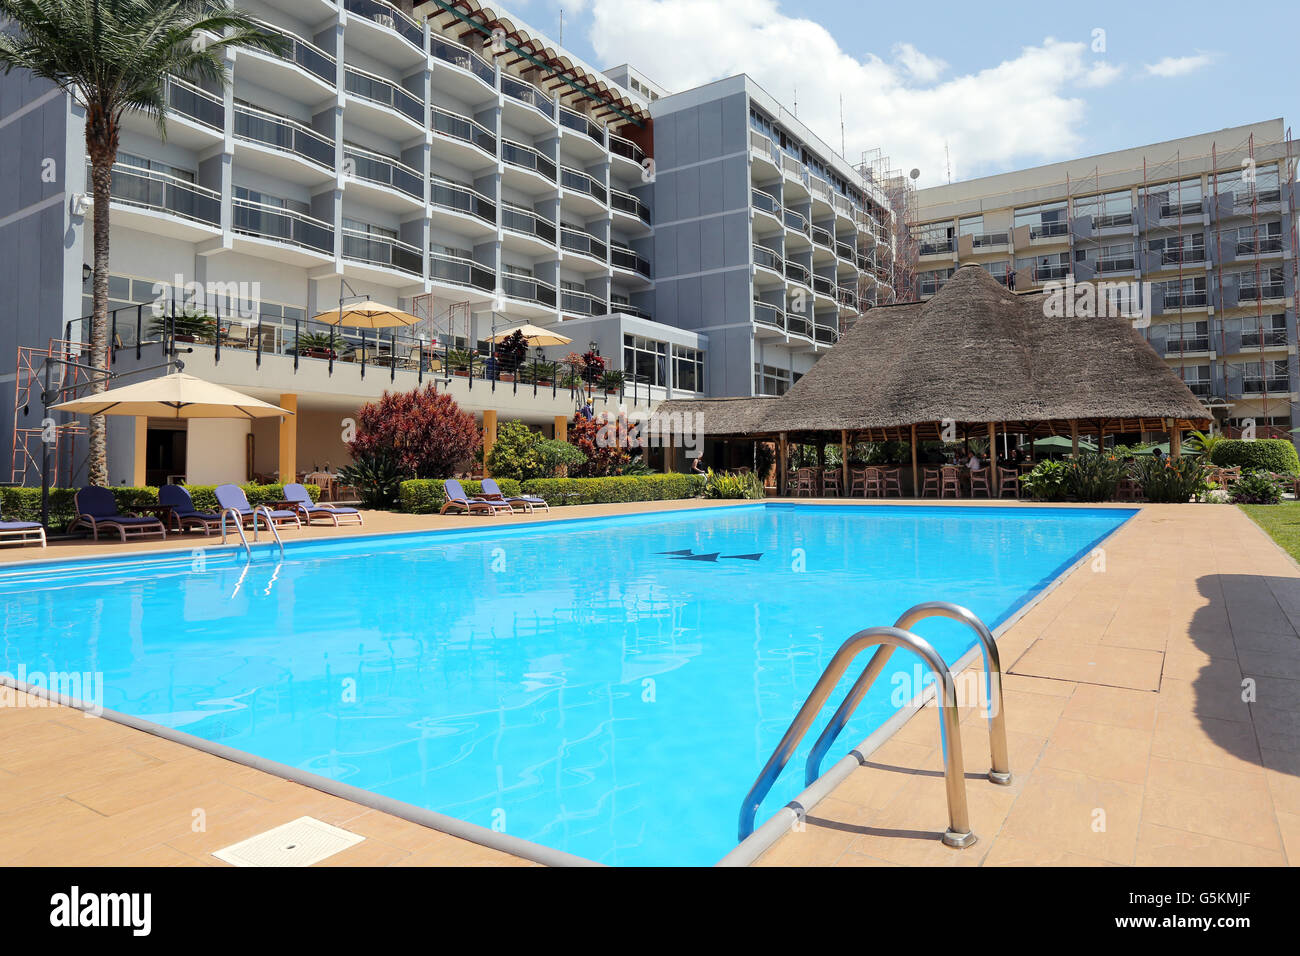 Kigali, Rwanda, Africa - Swimming pool of Hôtel des Mille Collines, Kempinsky Group. Hôtel des Mille Collines made famous in the movie "Hotel Rwanda", it is the place where terrified Tutsi's took refuge during the 1994 genocide. Stock Photo